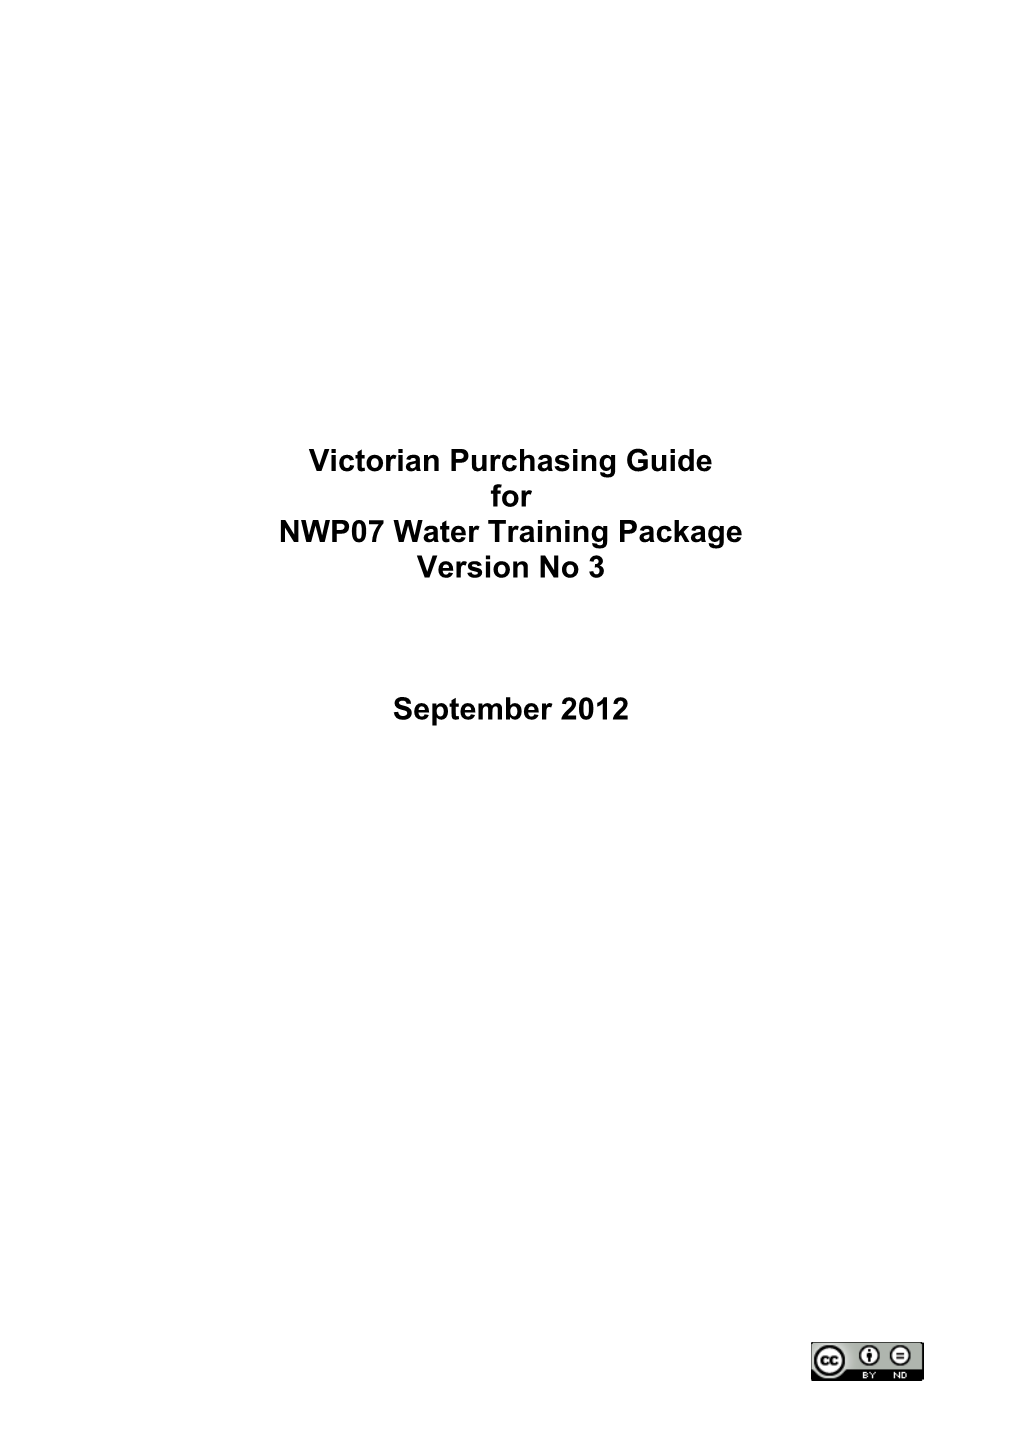 Victorian Purchasing Guide for NWP07 Water Industry Version 3